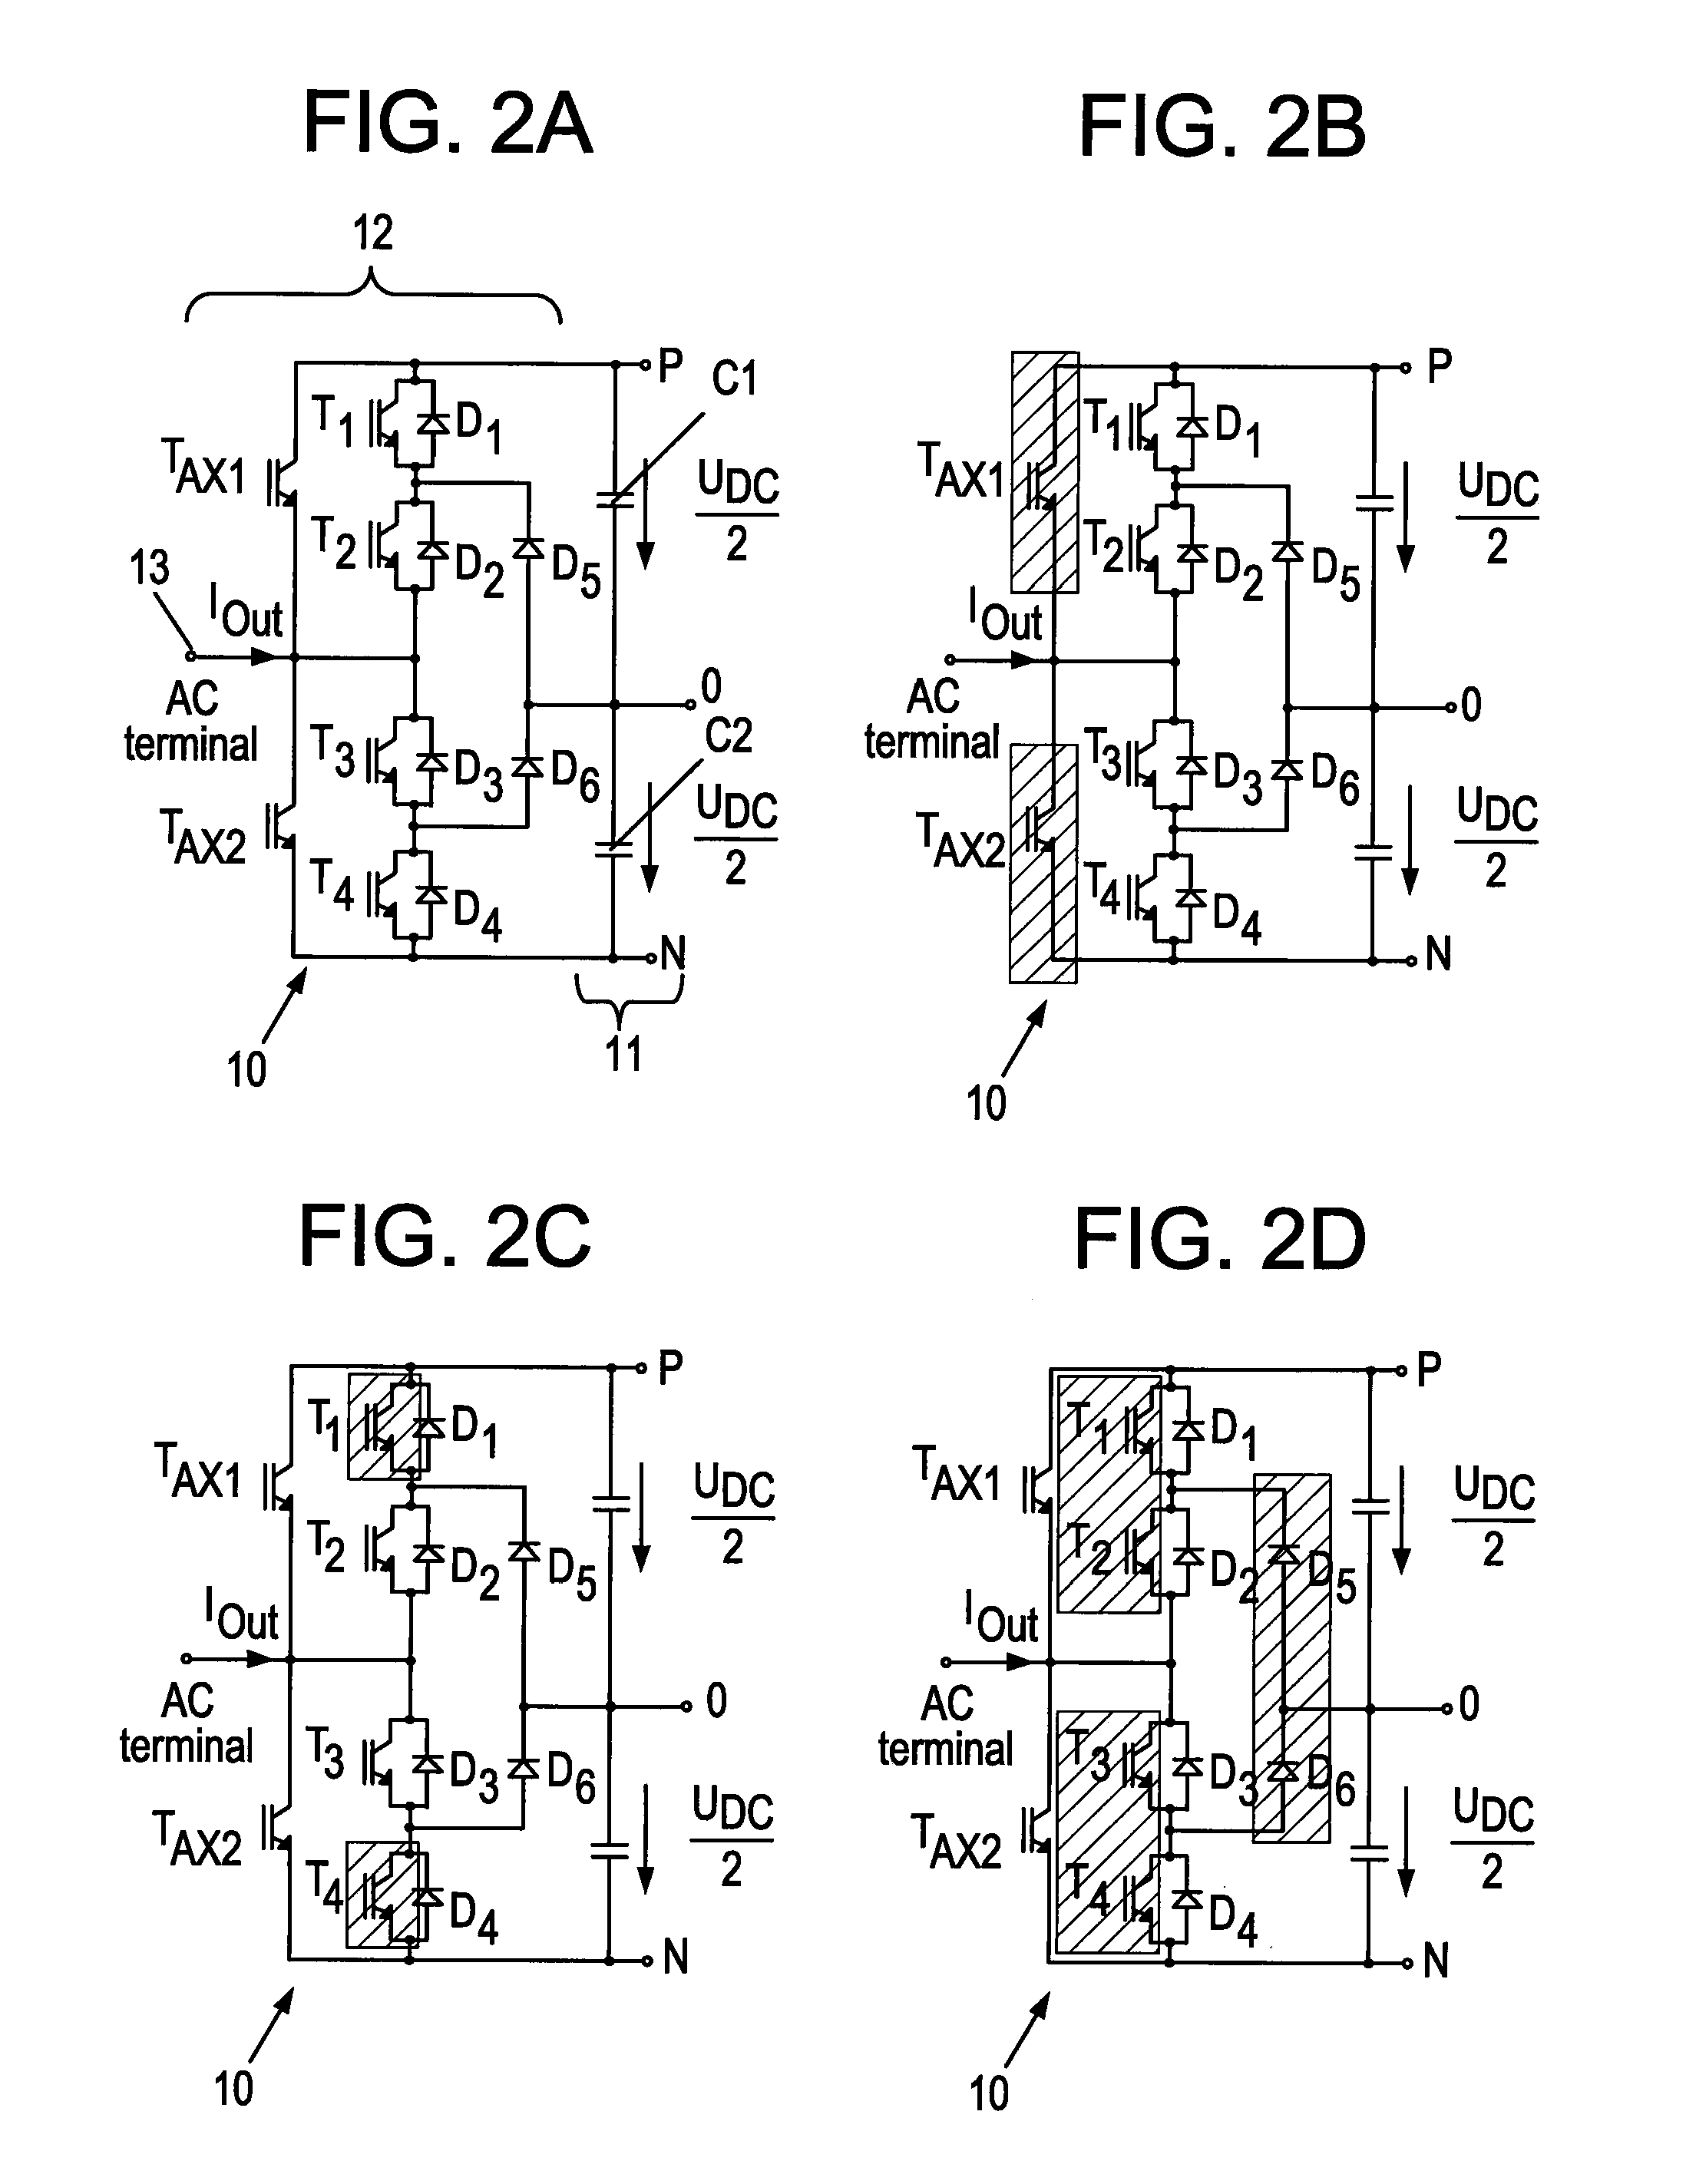 Voltage source converter (VSC) with neutral-point-clamped (NPC) topology and method for operating such voltage source converter